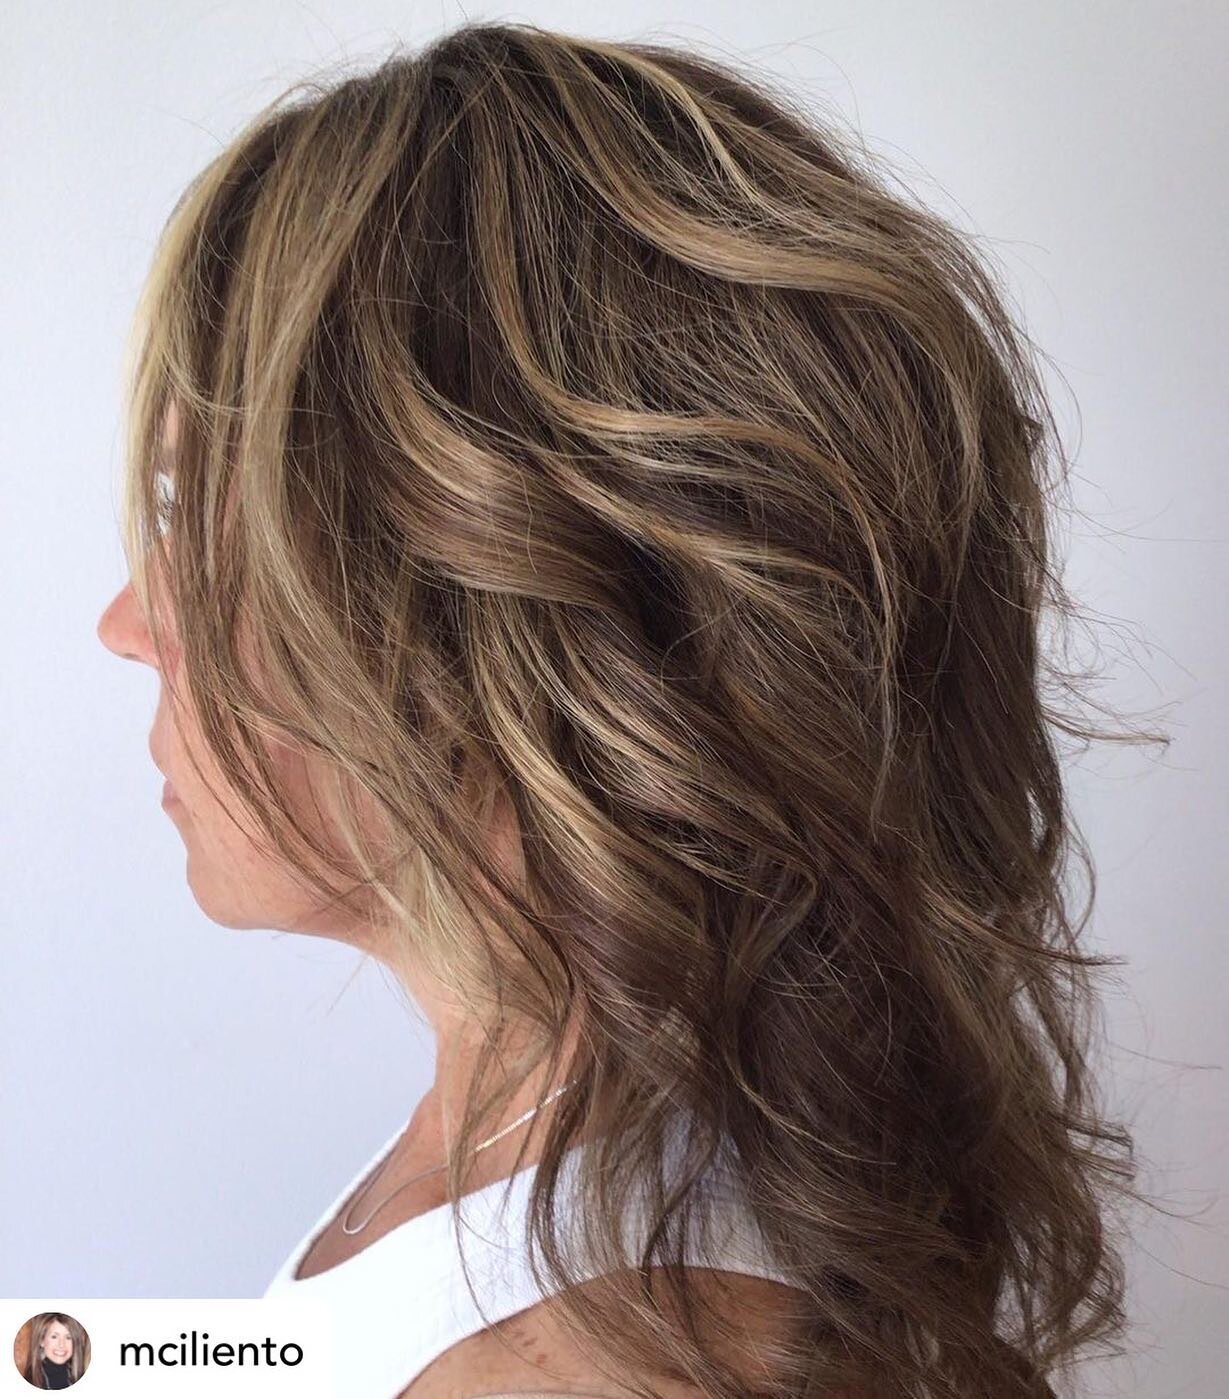 Bronde: adjective\&lsquo;br&auml;nd\ is a color technique that fuses brown and blonde, to create a flattering, sun kissed color result.  @mciliento 
#Saratogahairsalon #Hairstylist #Salon #SaratogaHair #SaratogaSalon #SaratogaSpringsSalon #SaratogaSp